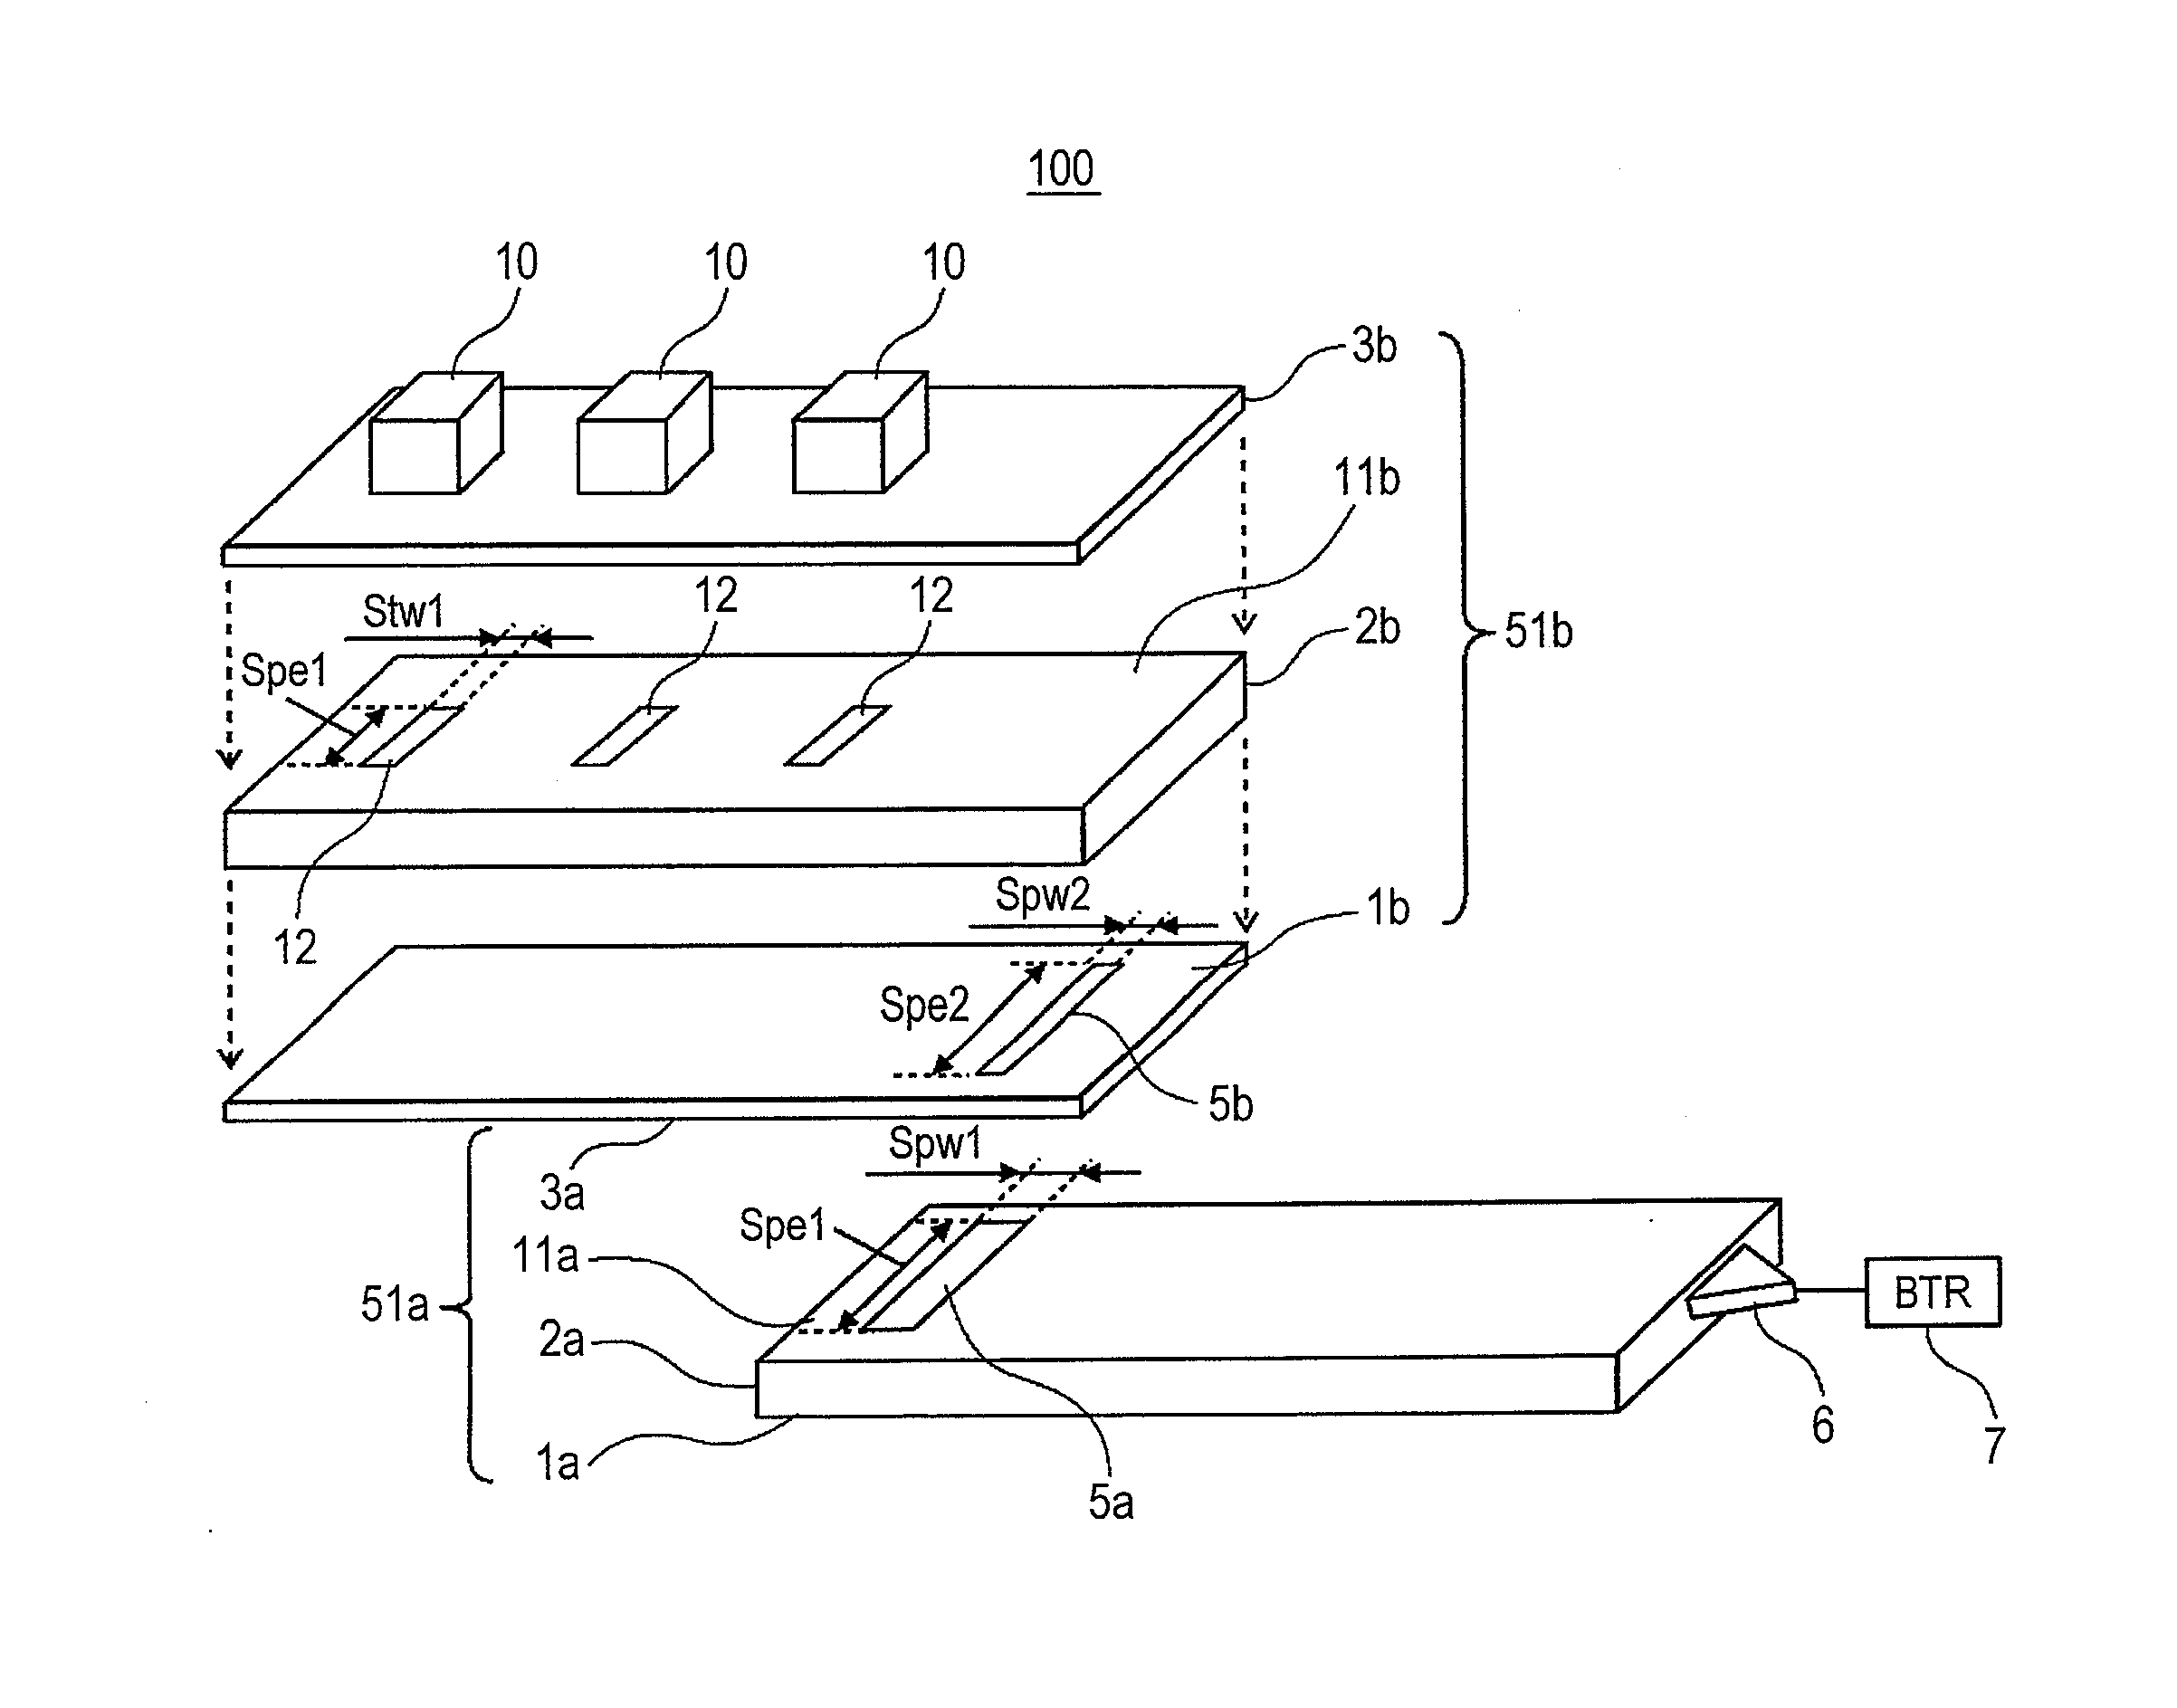 Electromagnetic wave propagation path and electromagnetic wave propagation device